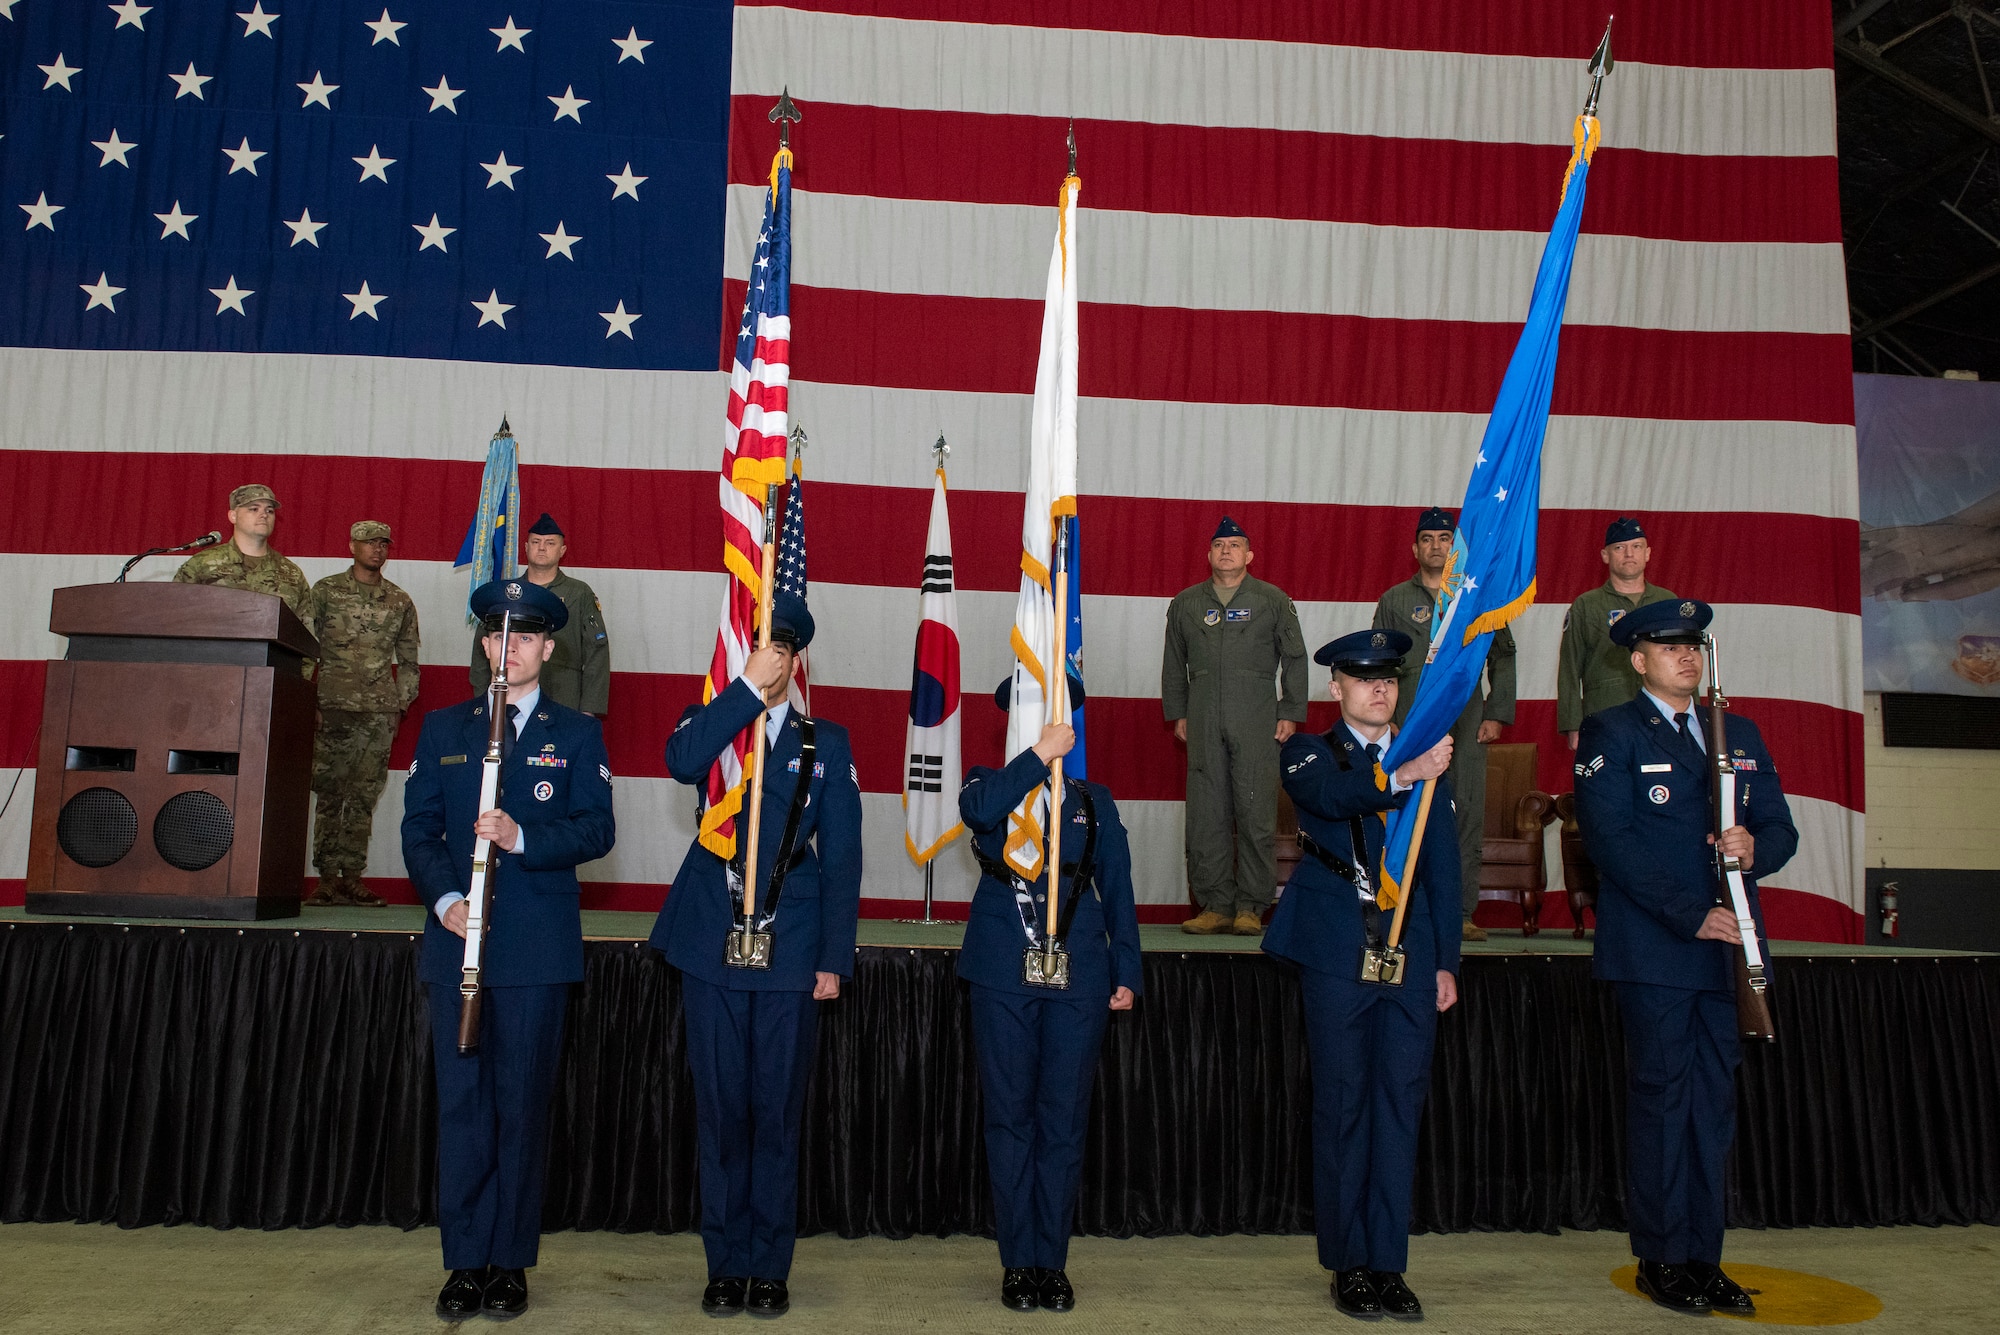 51st Operations Group held a change of command ceremony at Osan Air Base, Republic of Korea, May 28, 2021. Col. David Raymond transferred command of the 51st OG to Col. Matthew Gaetke.